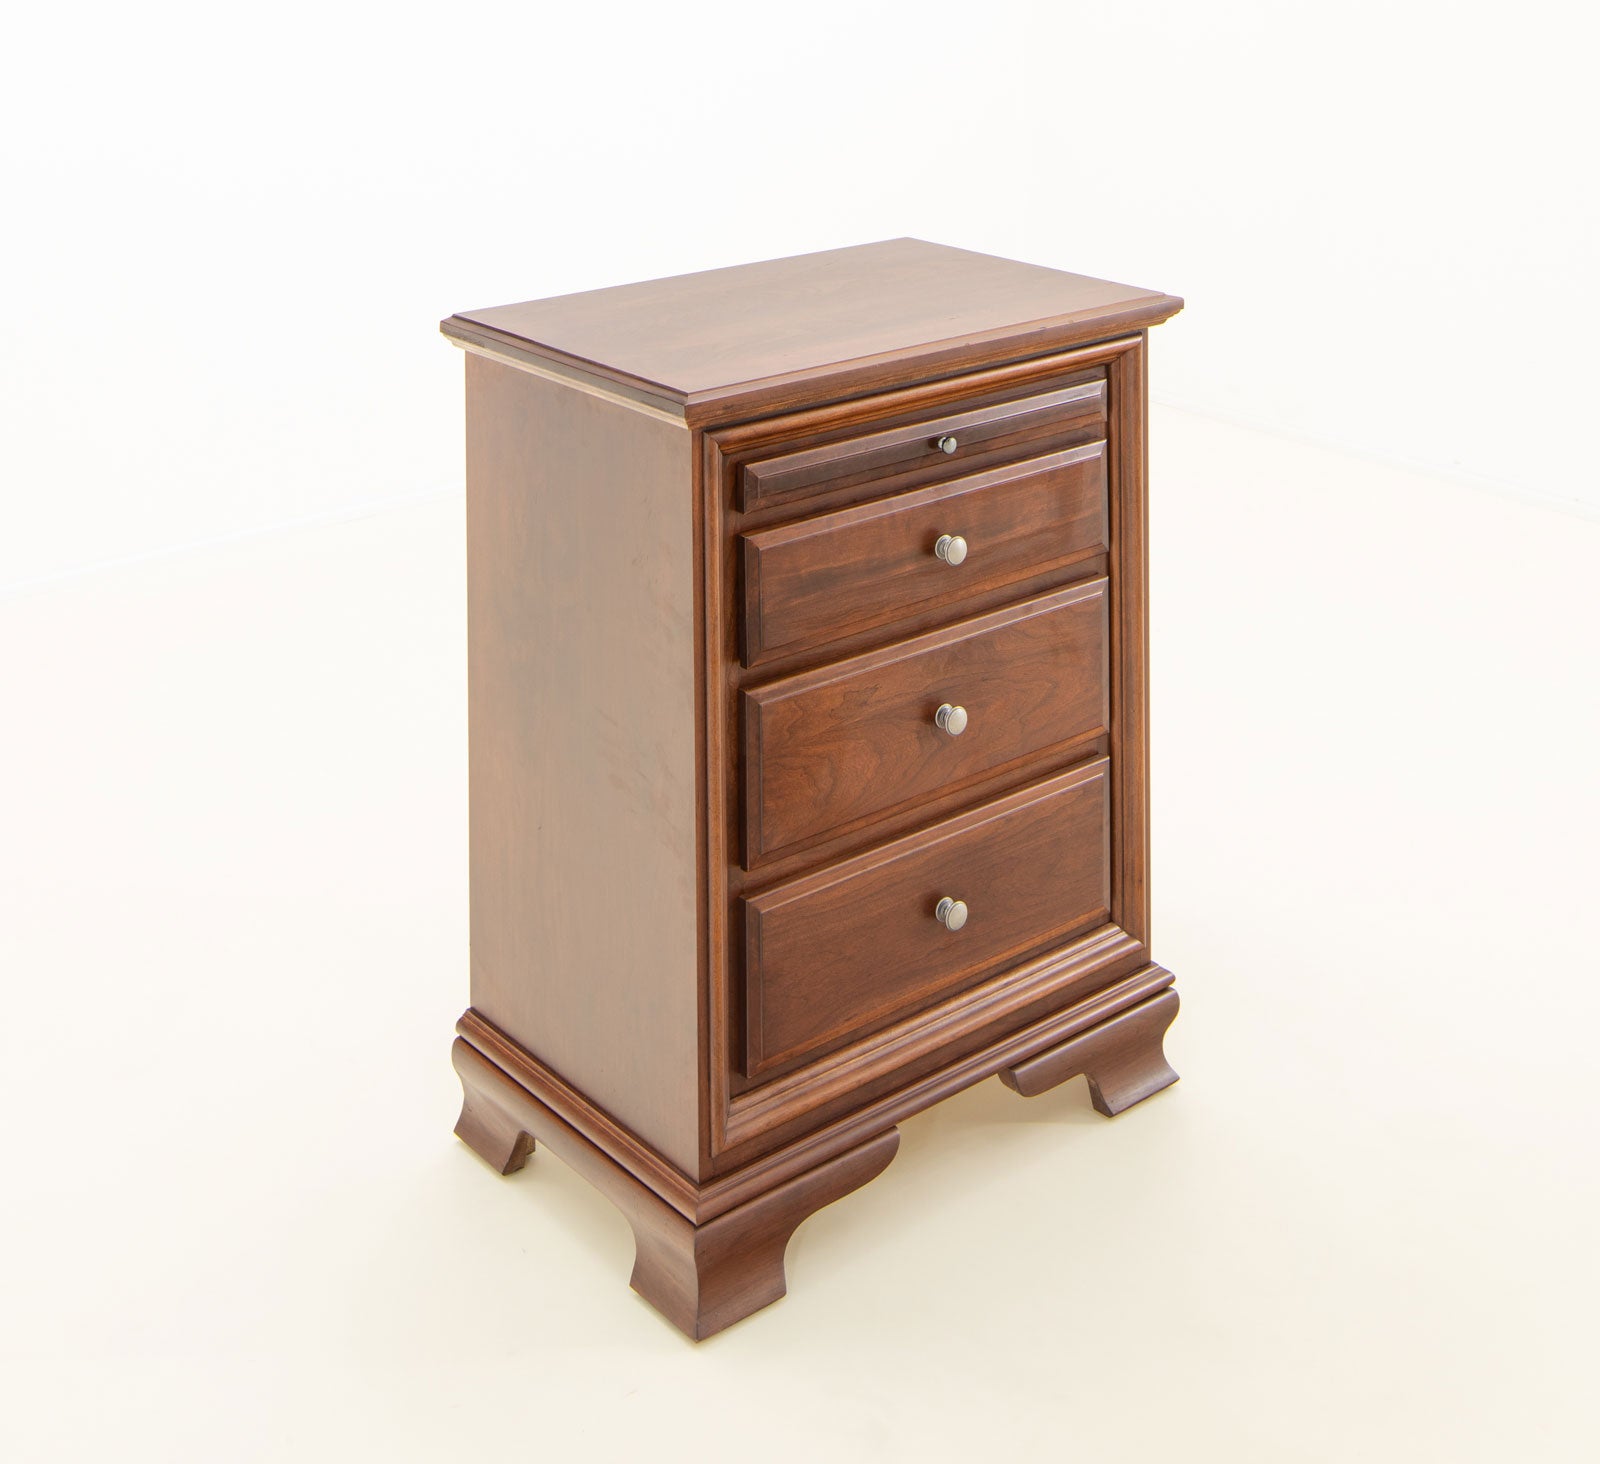 Amish Classic Nightstand with Pullout Shelf